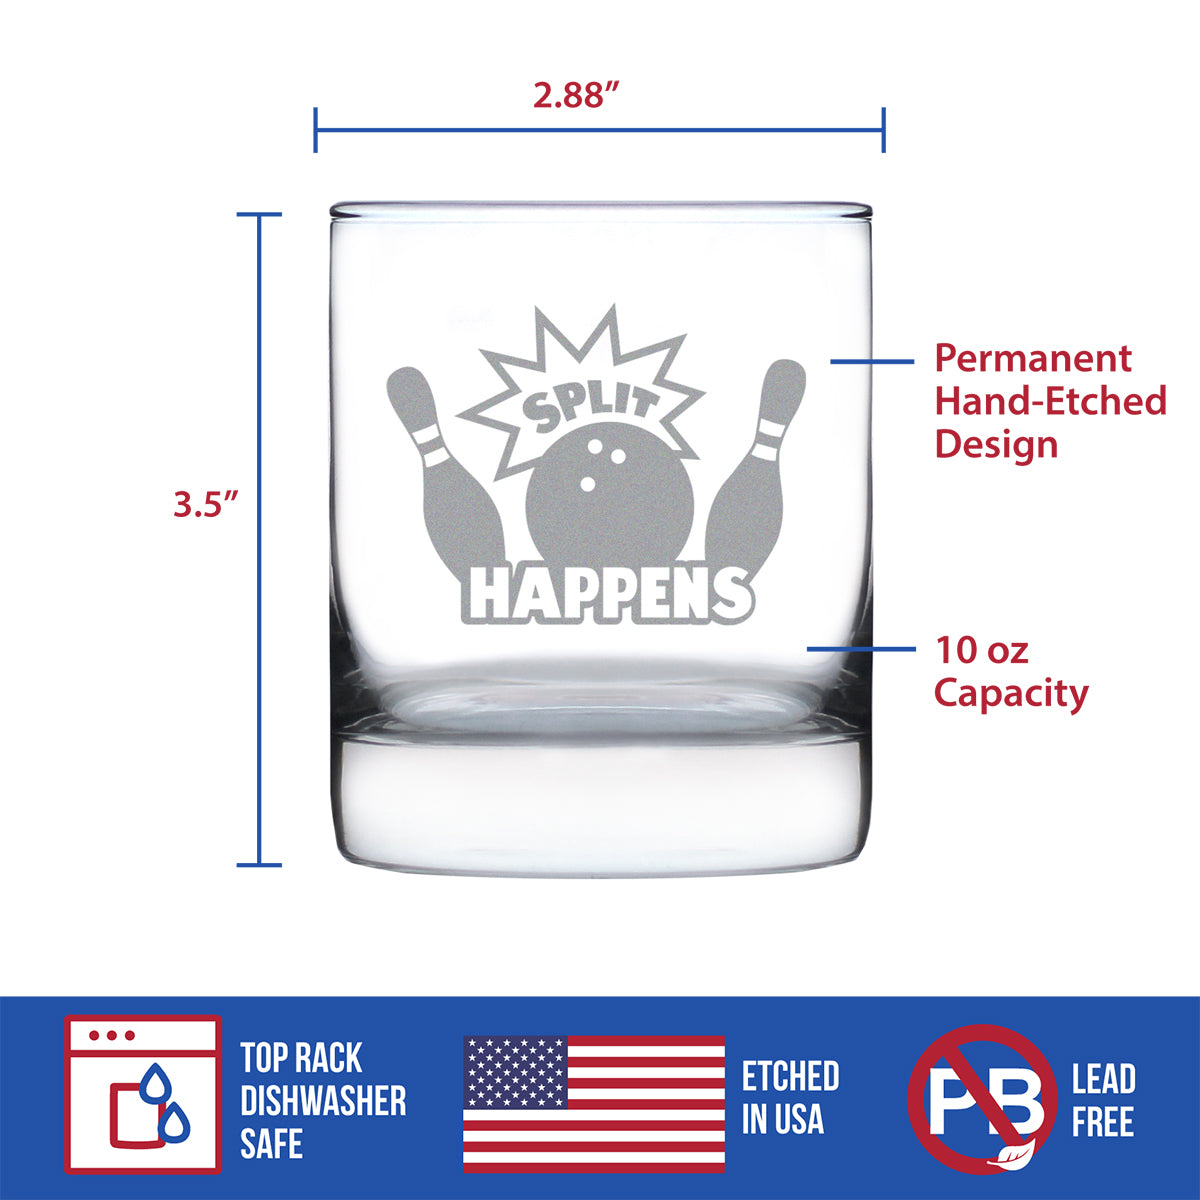 Split Happens Whiskey Rocks Glass - Funny Bowling Themed Gifts and Décor for Bowlers - 10.25 Oz Glass